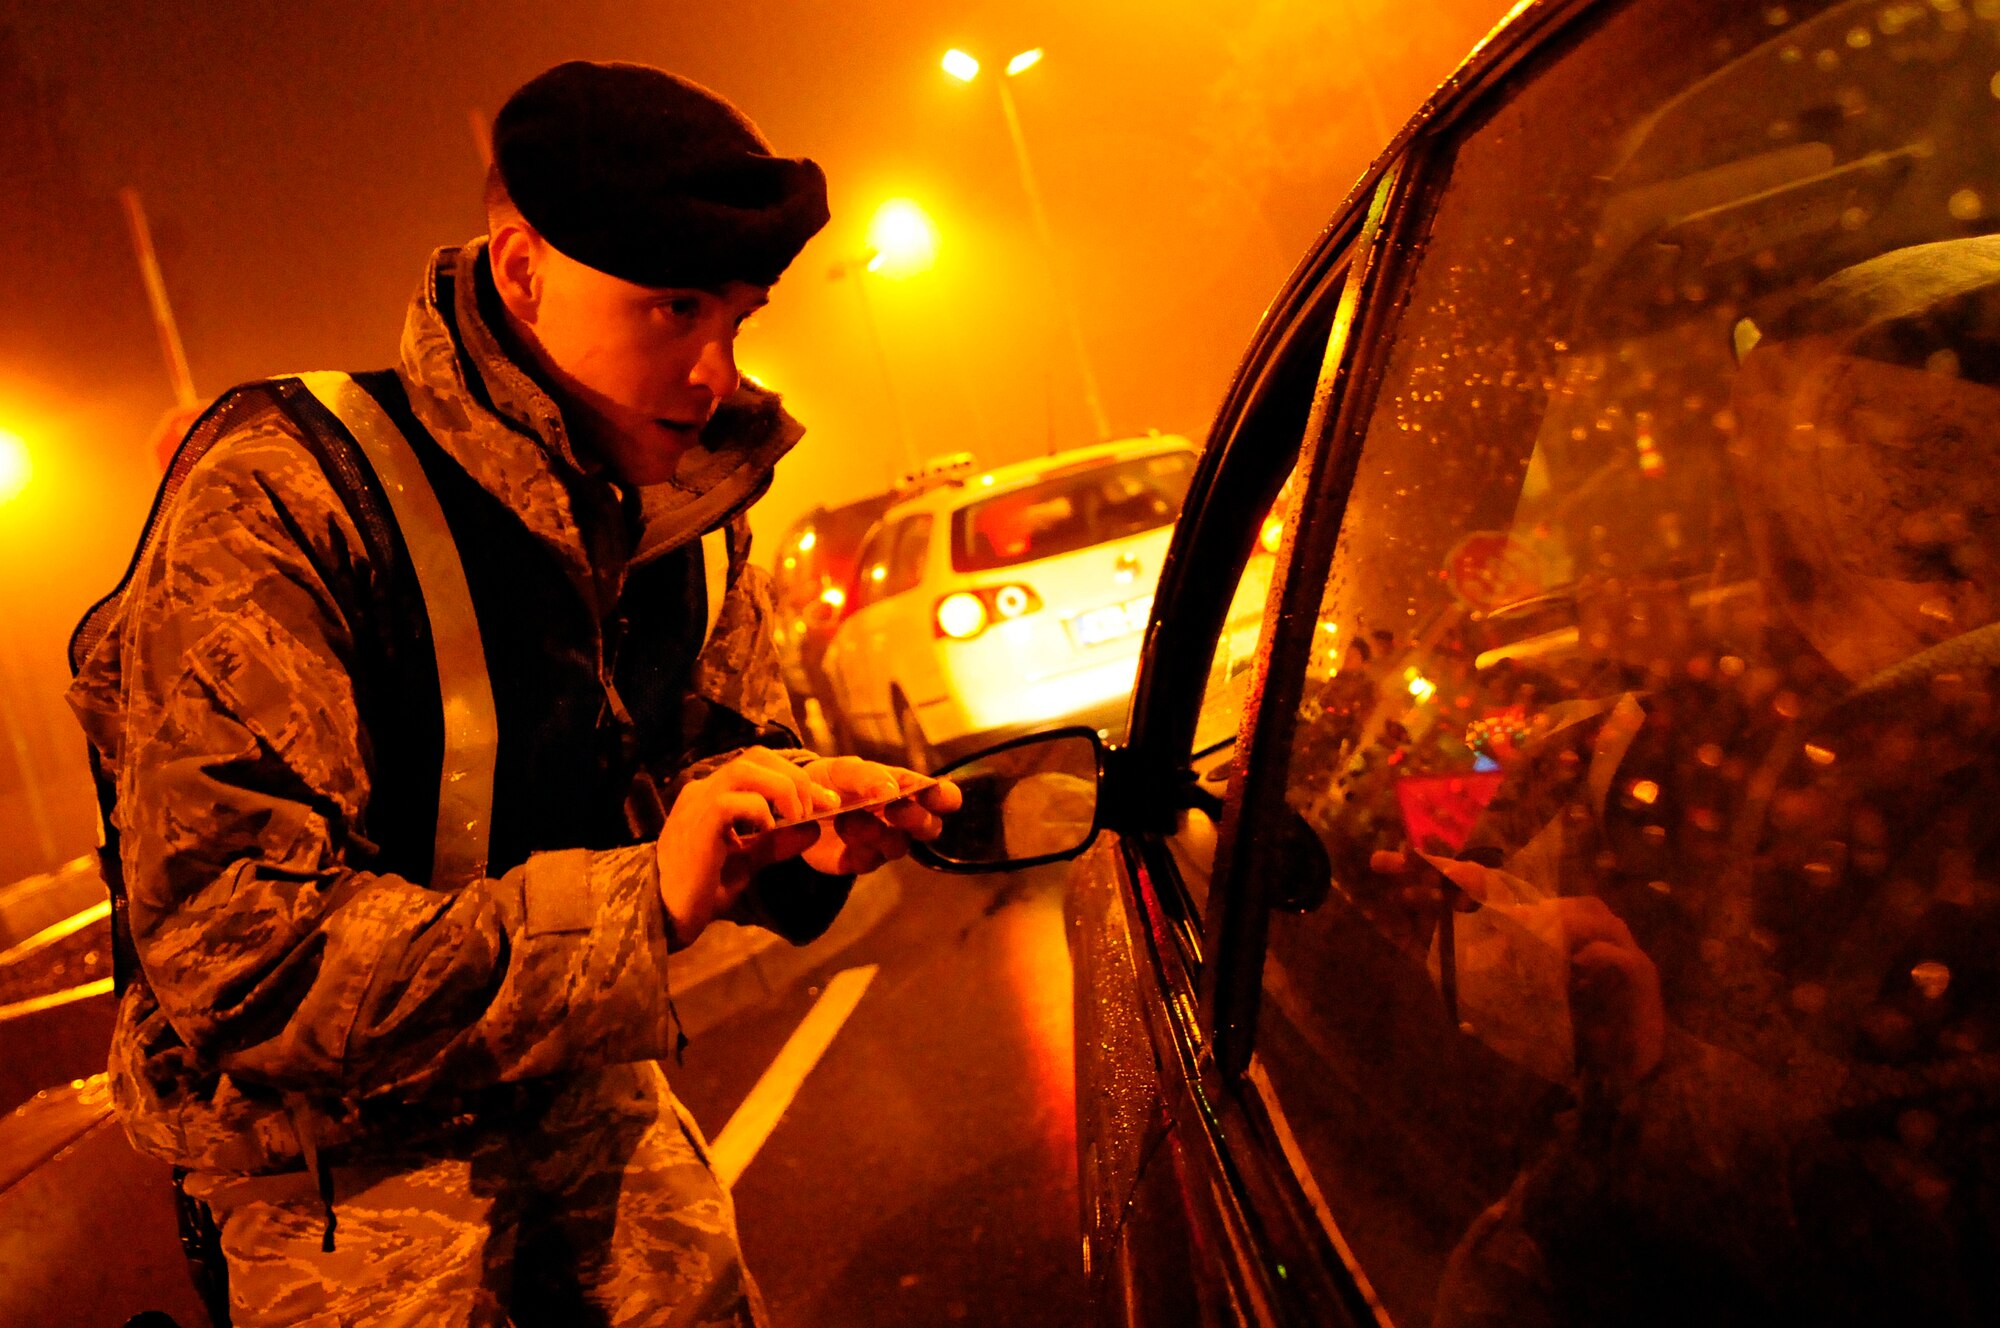 Airman James Grueser, 435th Security Forces Squadron member, checks identification information while participating in a sobriety checkpoint Feb. 7, 2009, at Ramstein Air Base. Sobriety checkpoints are being held randomly throughout the Kaiserslautern Military Community in an effort to enforce a zero-tolerance policy against driving under the influence of drugs and alcohol. (U.S. Air Force photo by Staff Sgt. Stephen J. Otero) 